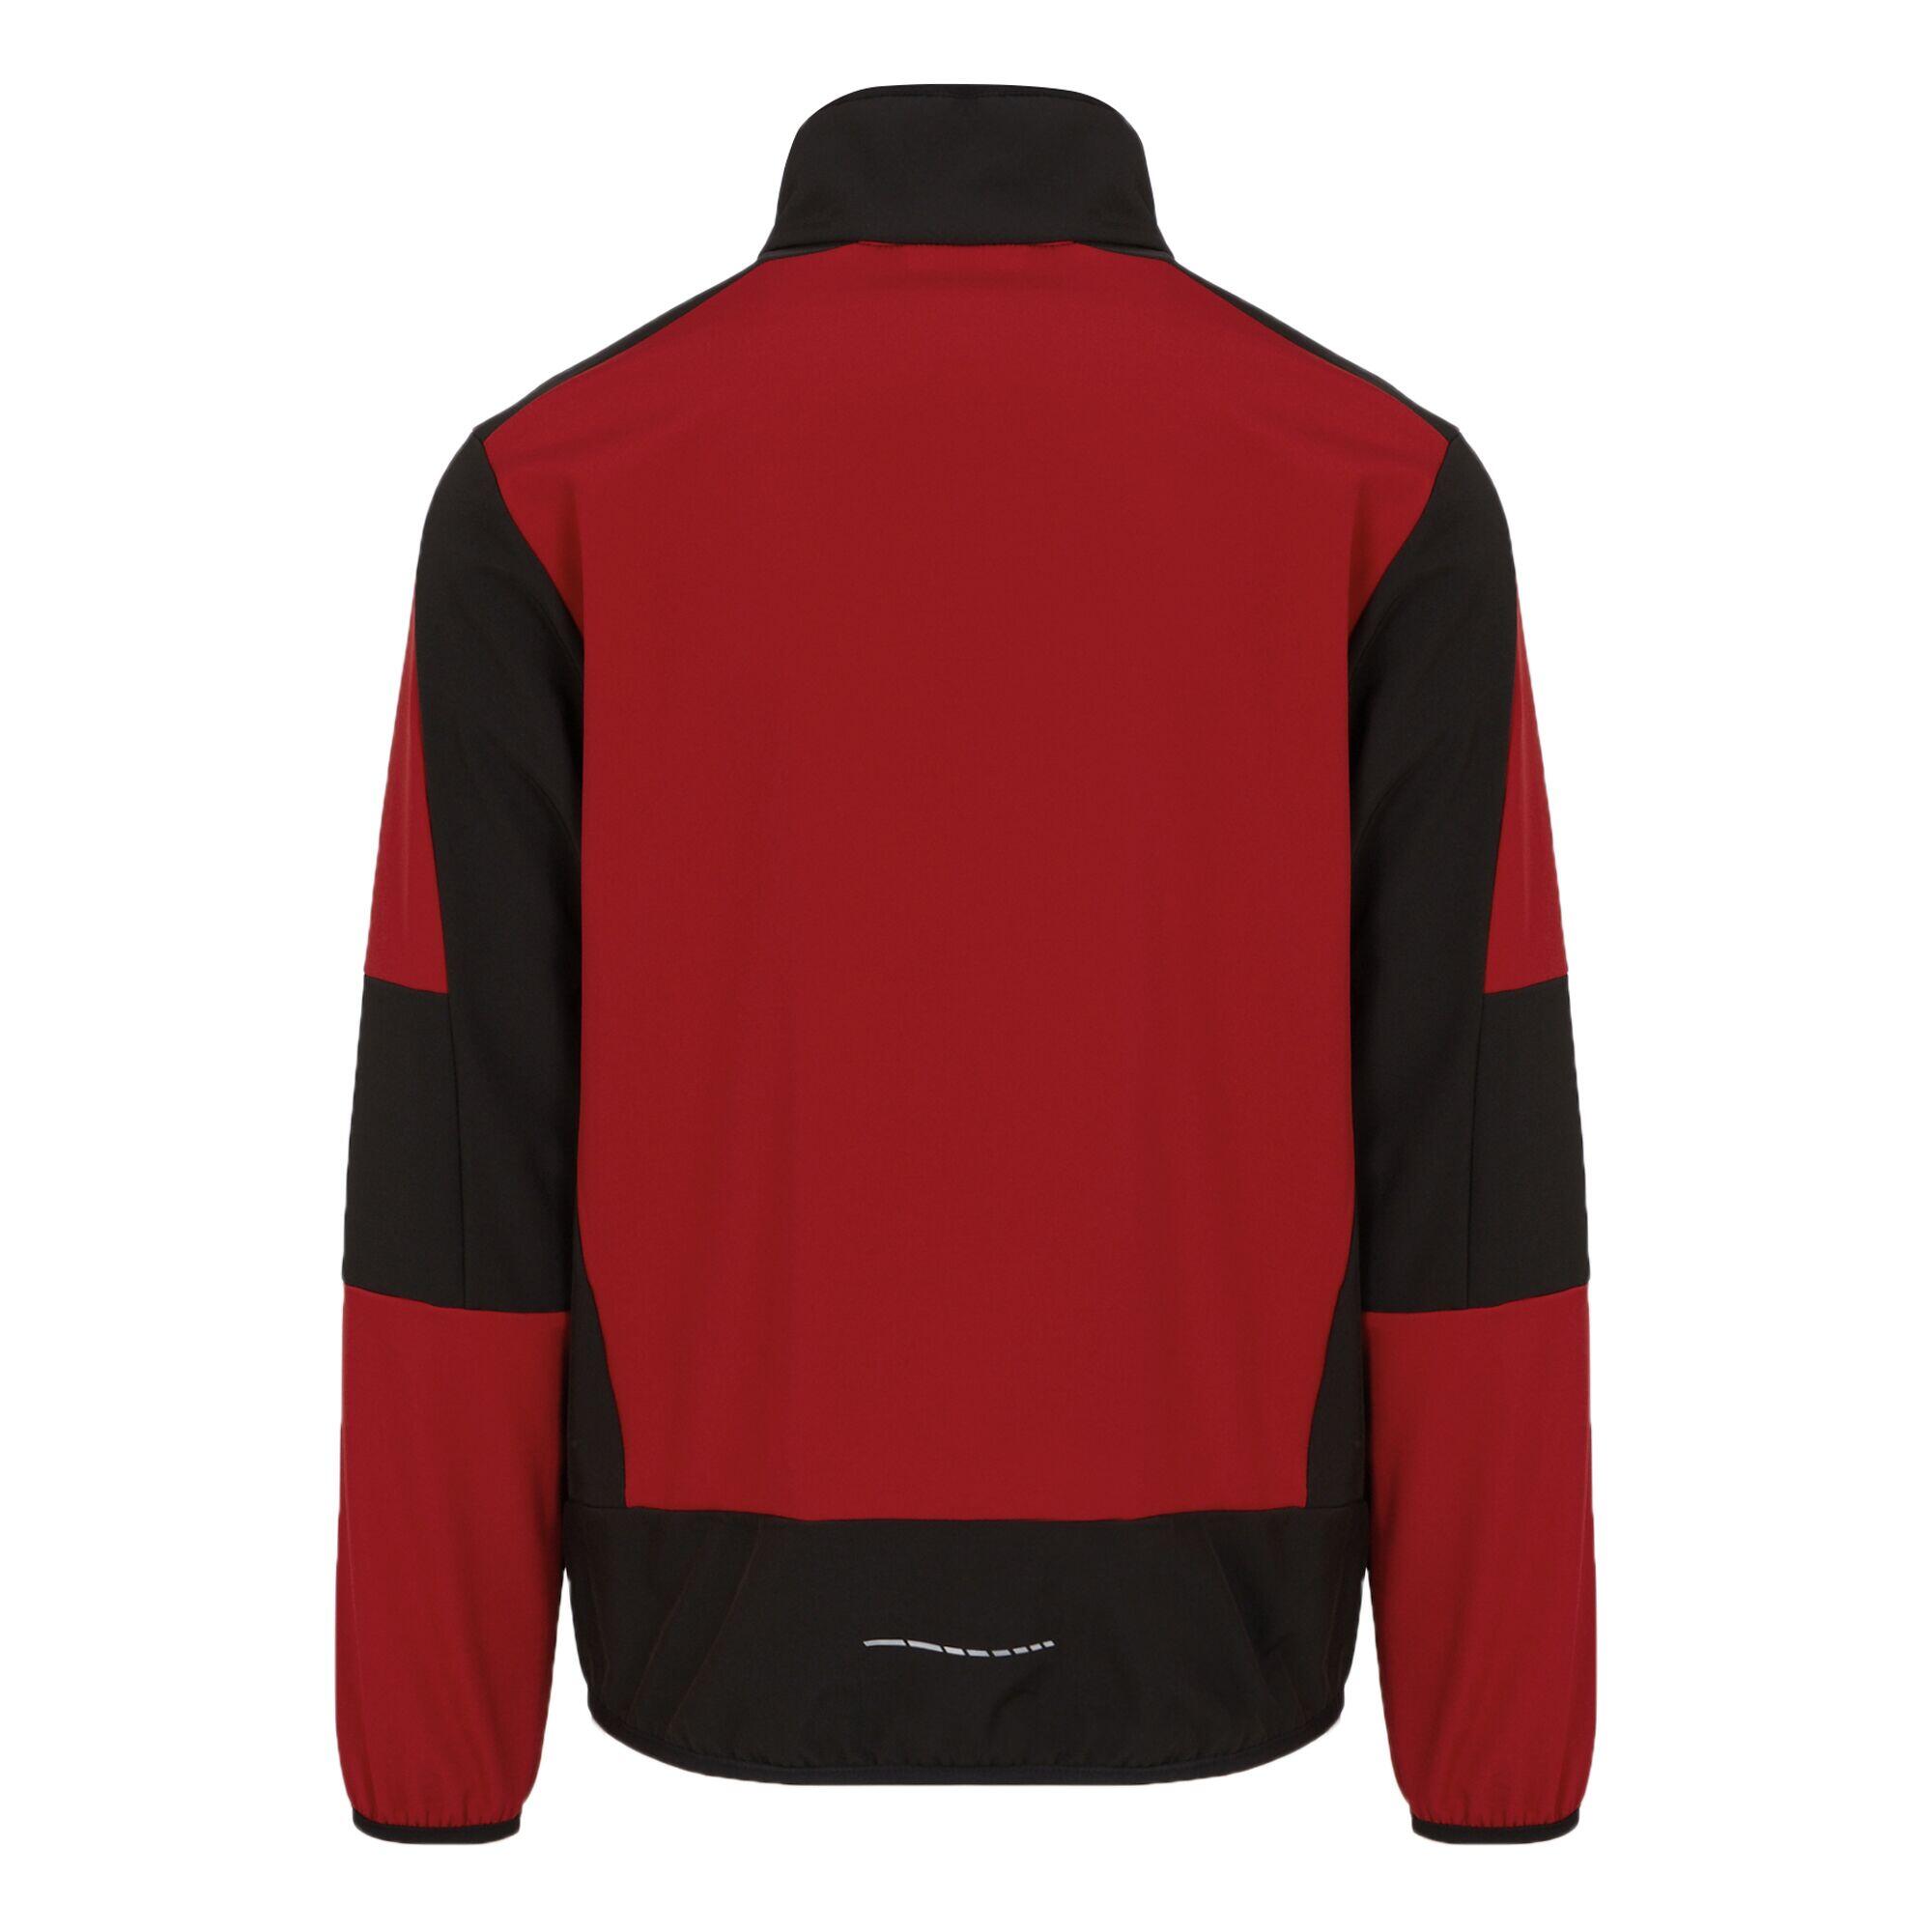 Unisex Adult EVolve 2 Layer Soft Shell Jacket (Classic Red/Black) 2/4